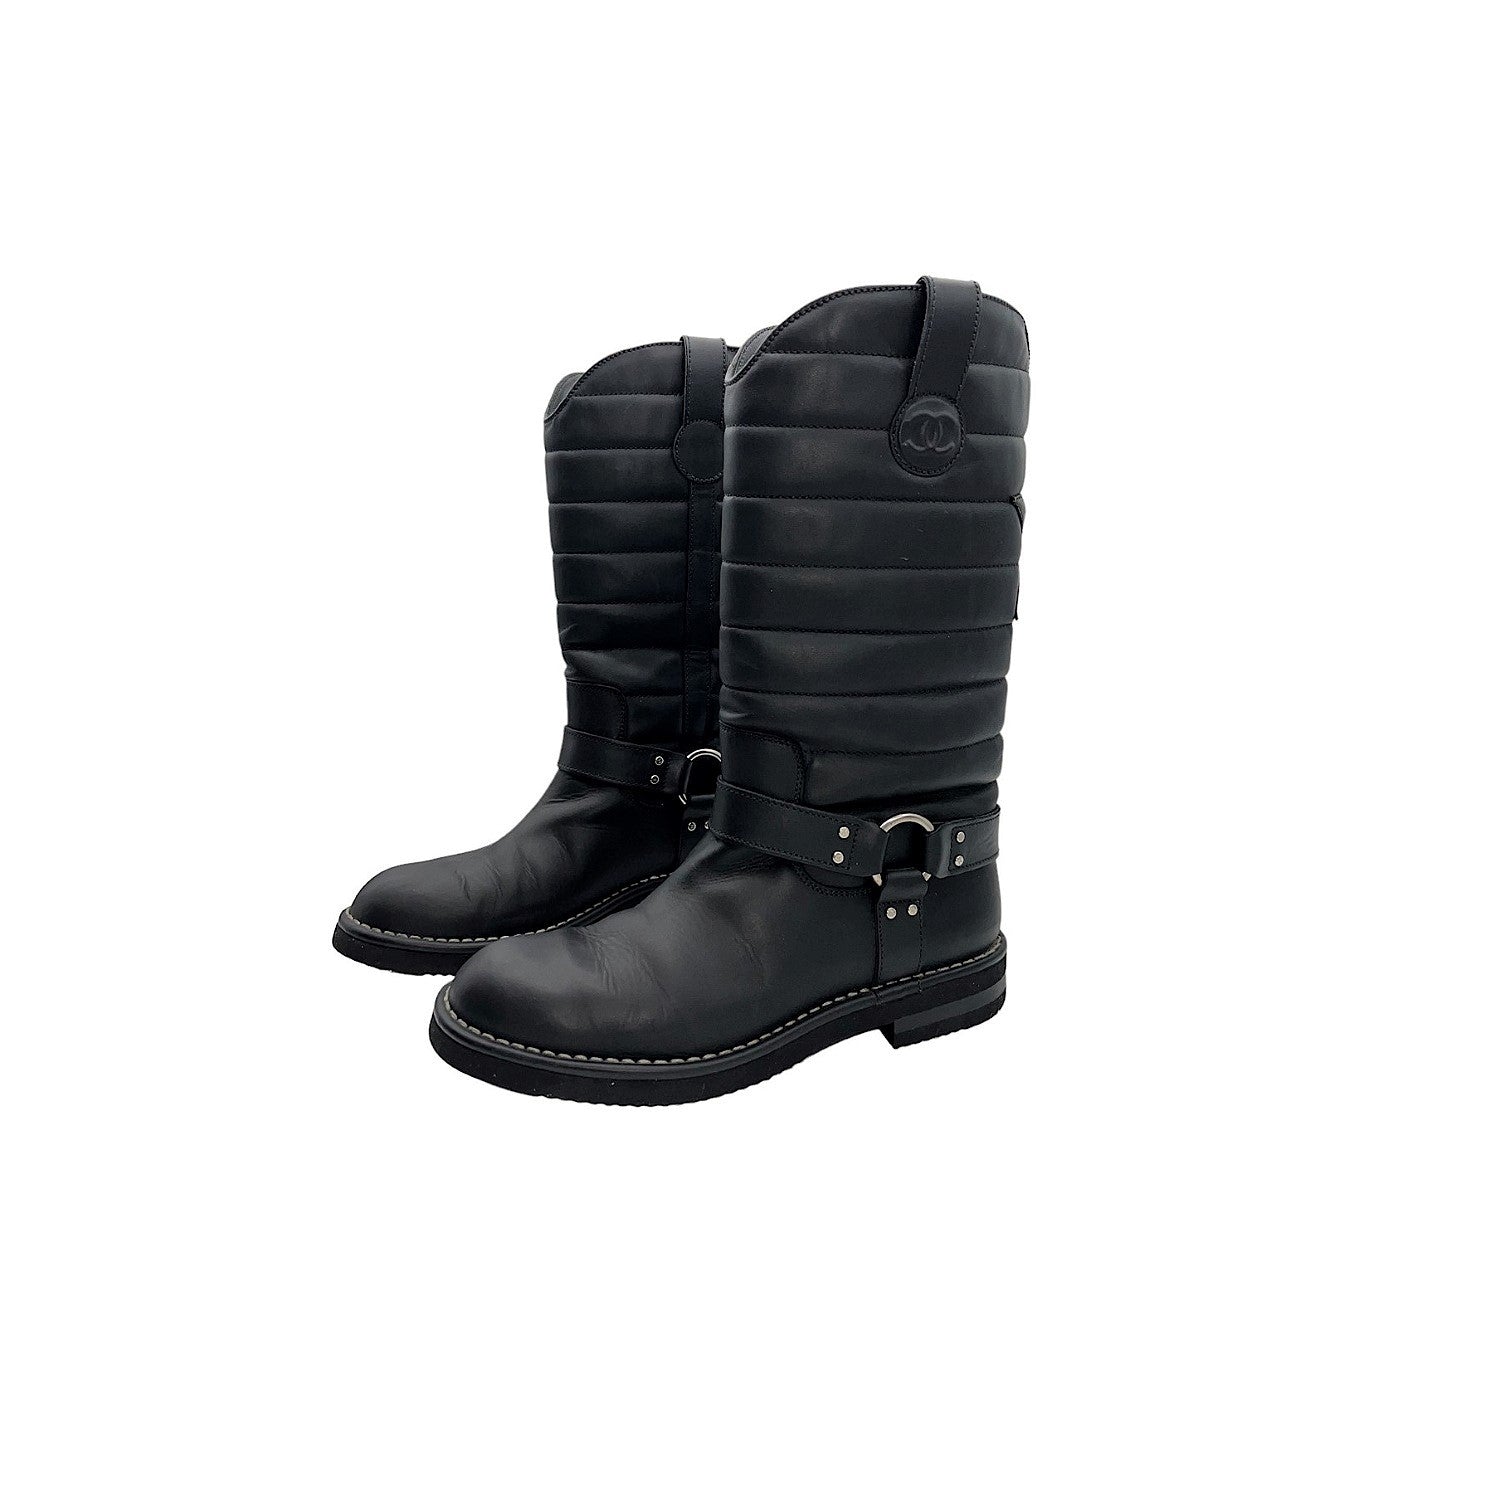 CHANEL Women's Biker Boots with Upper Leather for sale